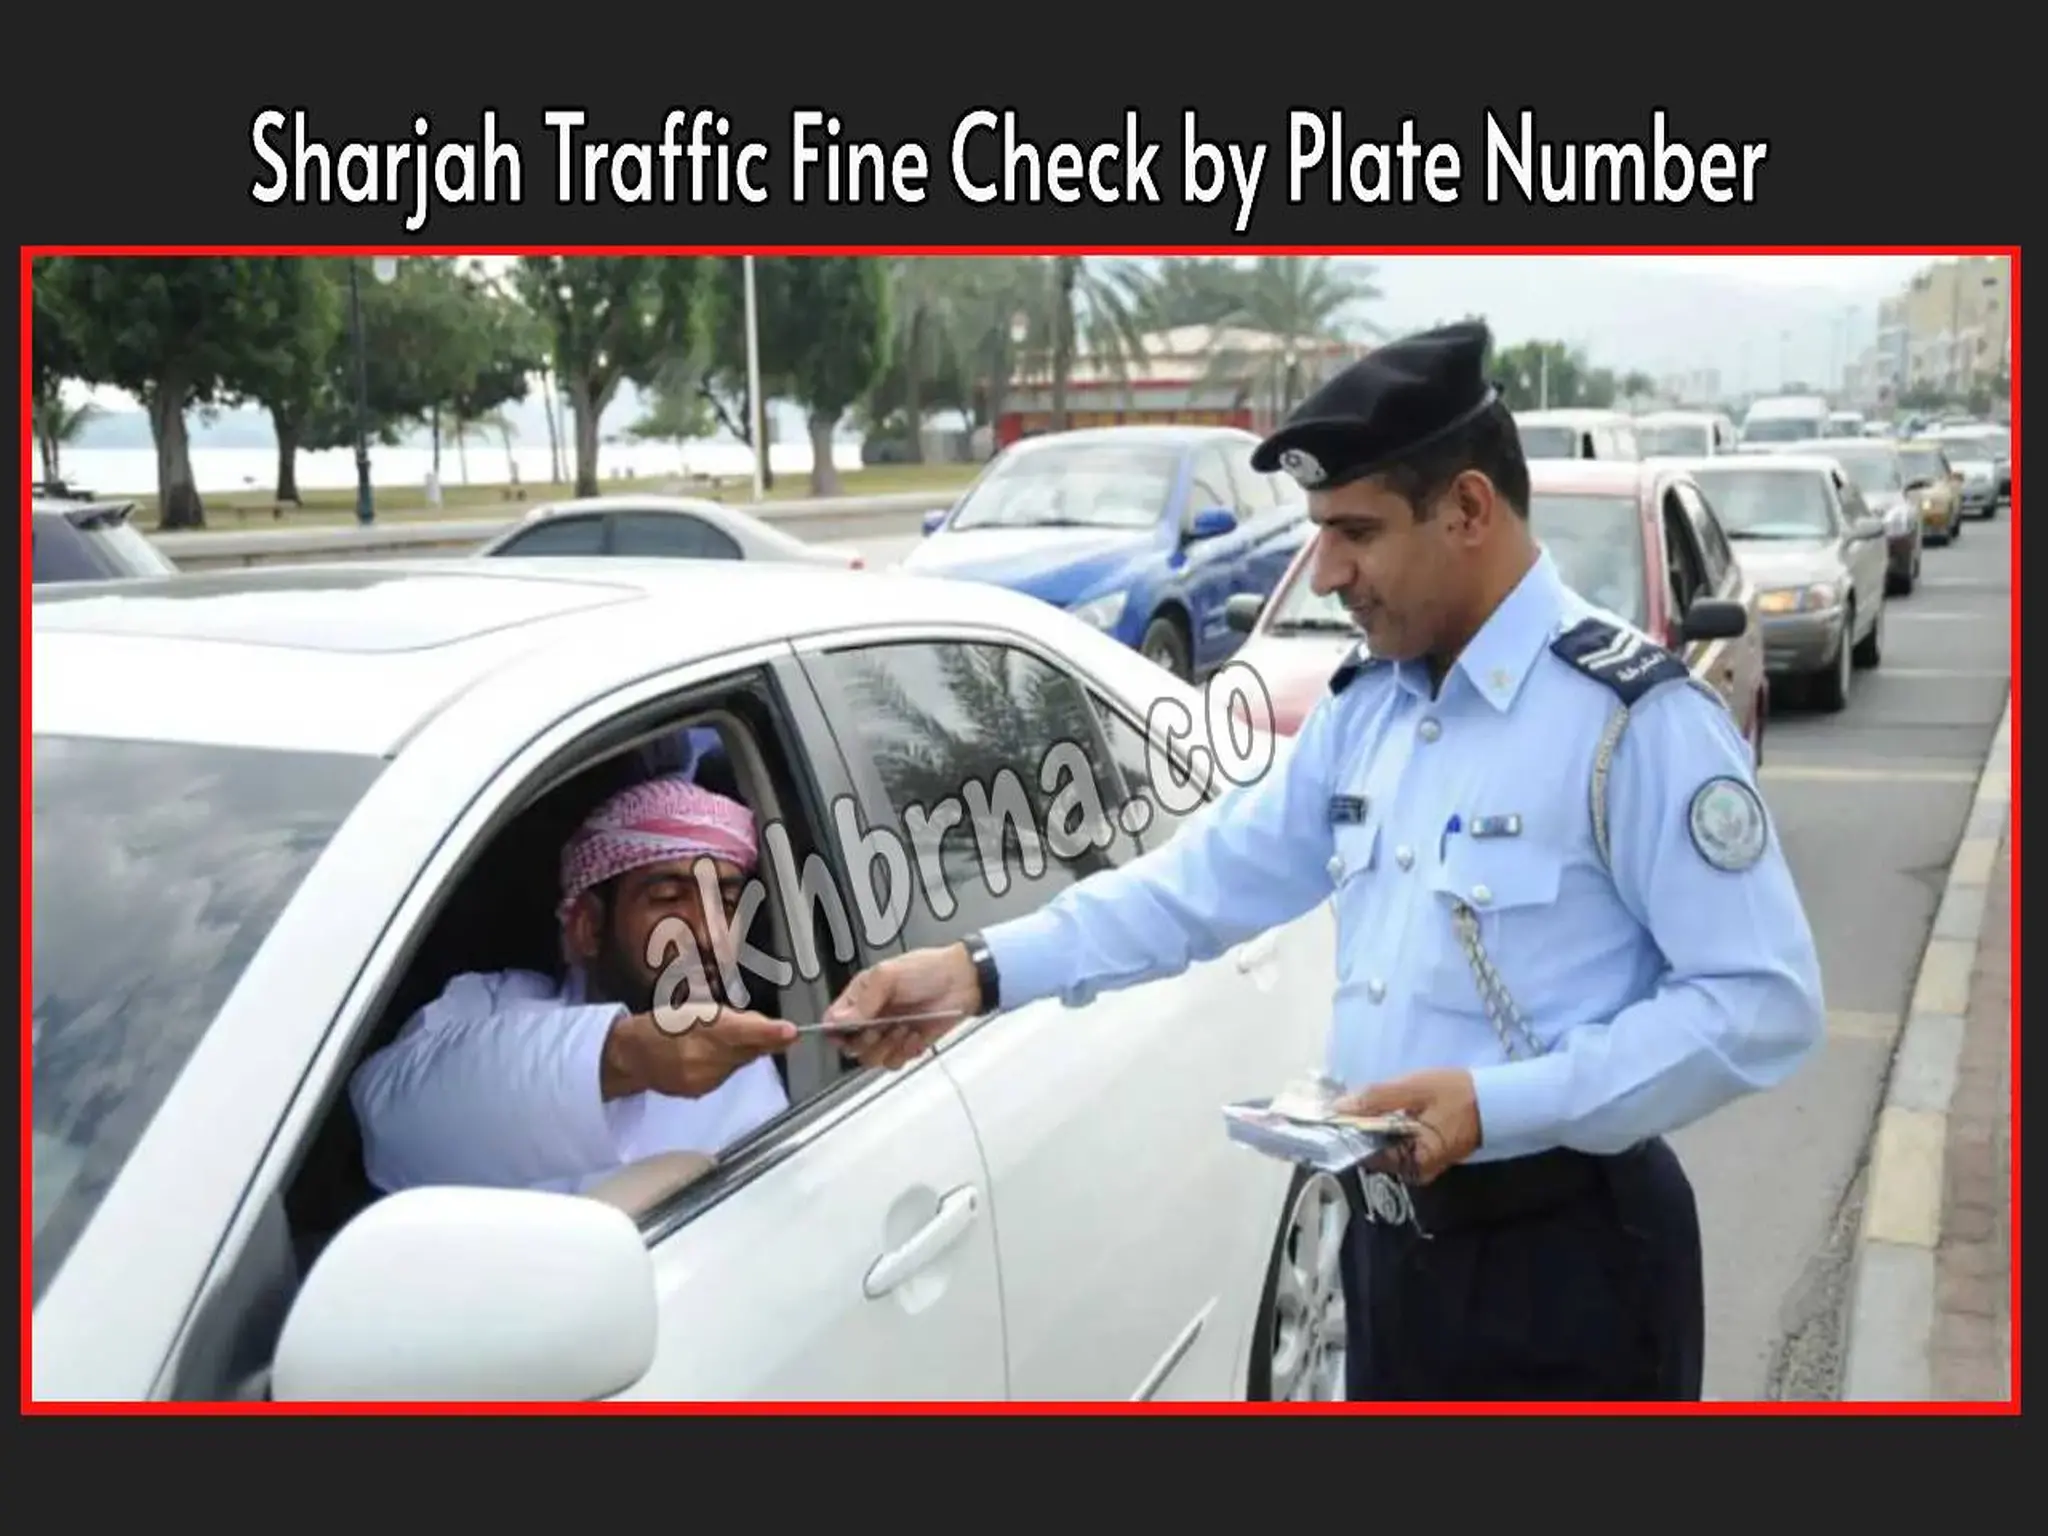 Sharjah Traffic Fine Check by Plate Number: How to Easily Manage Your Traffic Fines